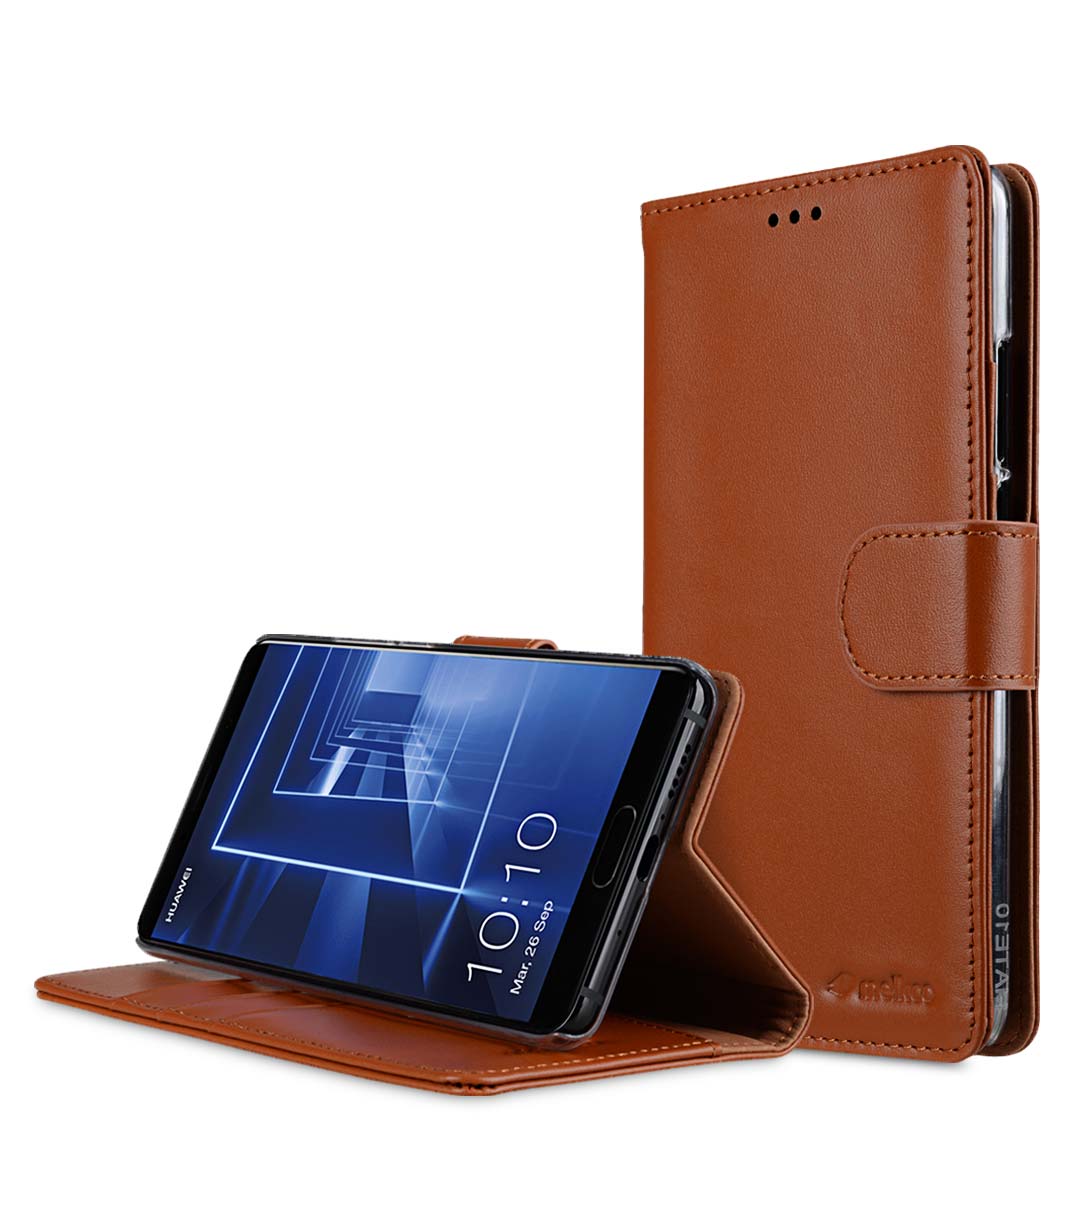 Melkco Premium Leather Case for Huawei Mate 10 - Wallet Book Clear Type Stand (Brown CH)